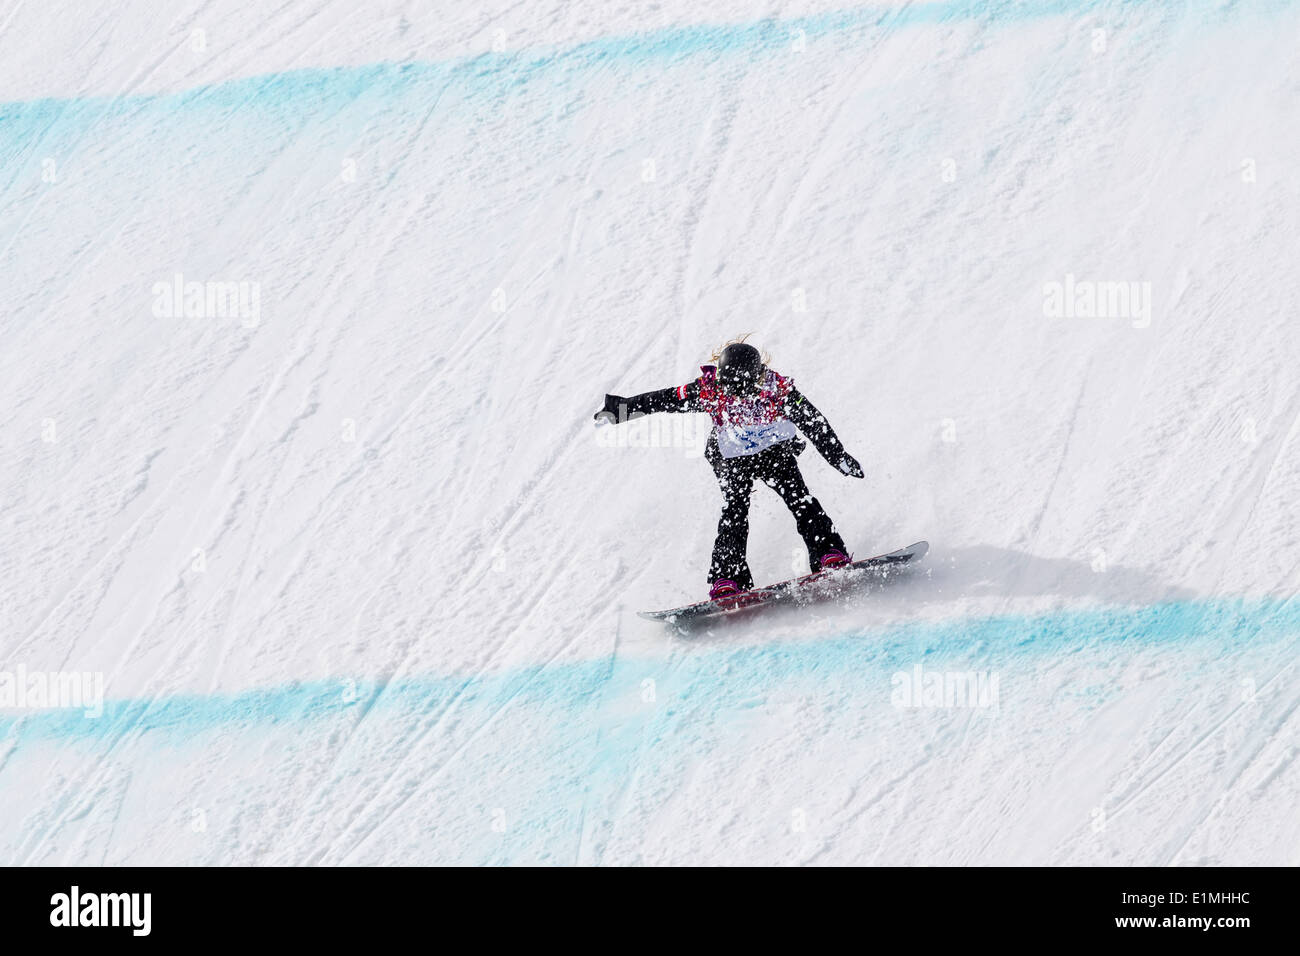 Anna Gasser (AUT) competing in Ladies's Snowboard Slopestyle at the Olympic Winter Games, Sochi 2014 Stock Photo